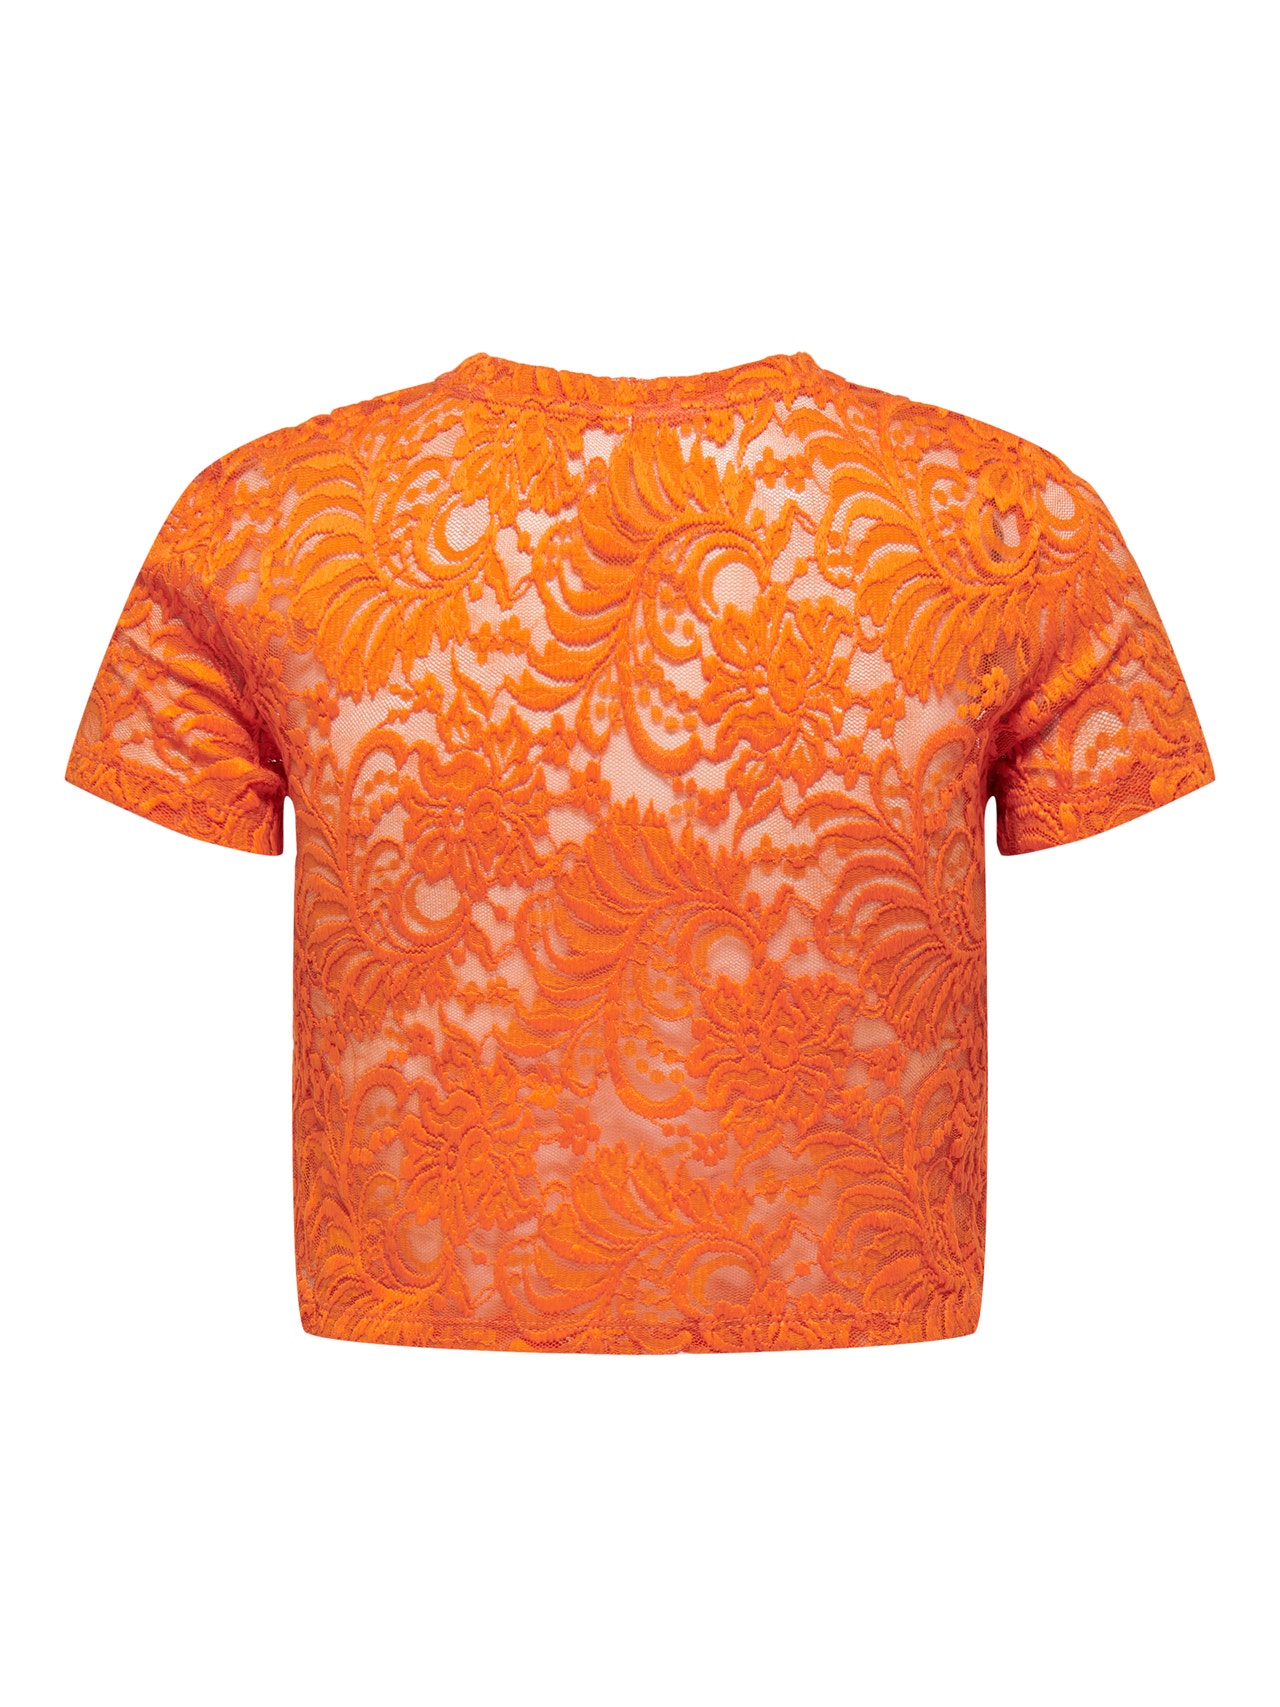 ONLY Cropped lace Short Sleeved Top -Orange Peel - 15173872